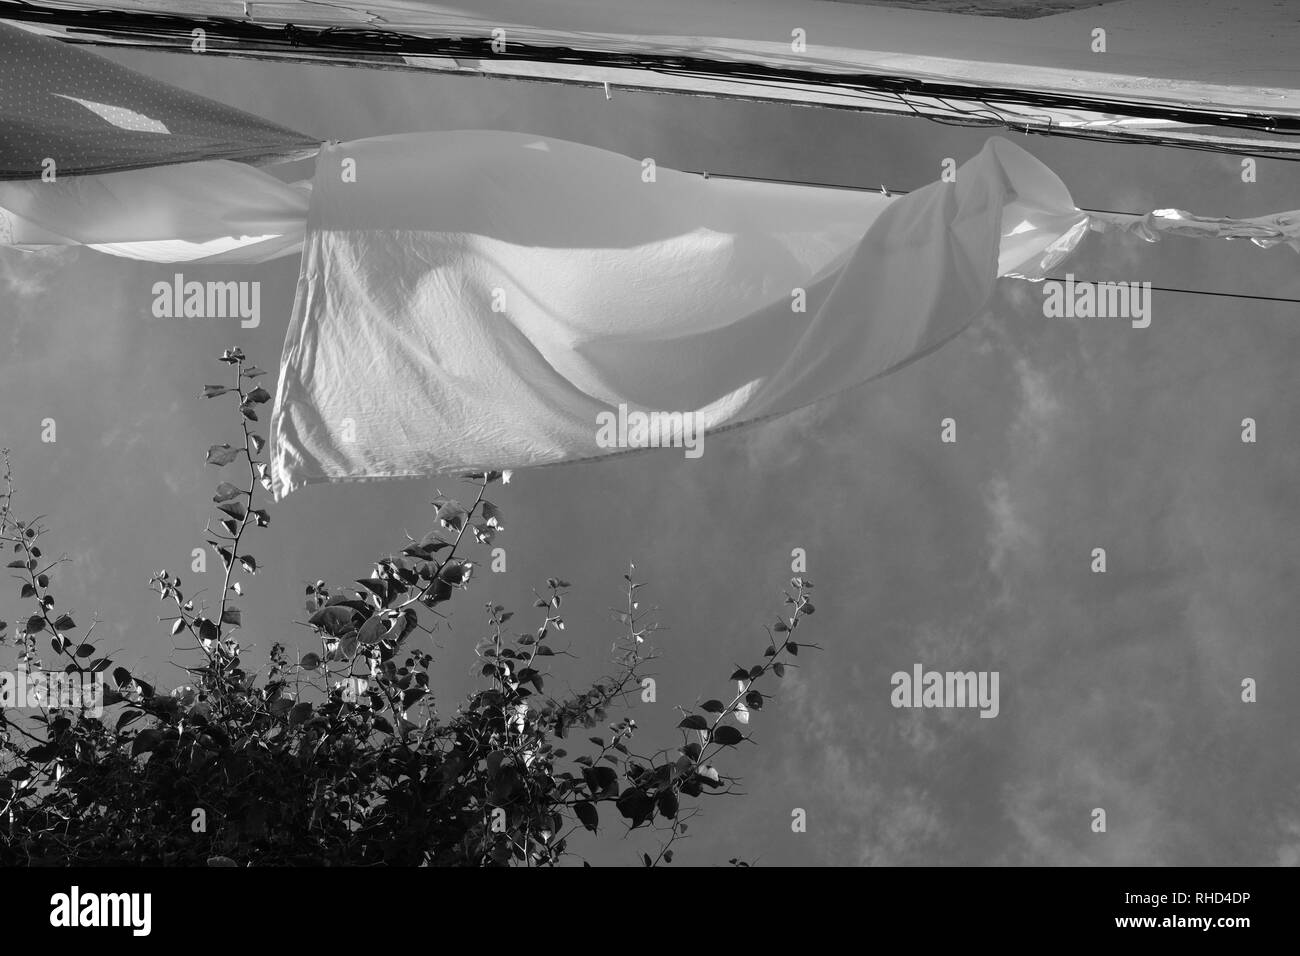 Pure white sheets hanging out to dry on a windy day on a washing line Stock Photo